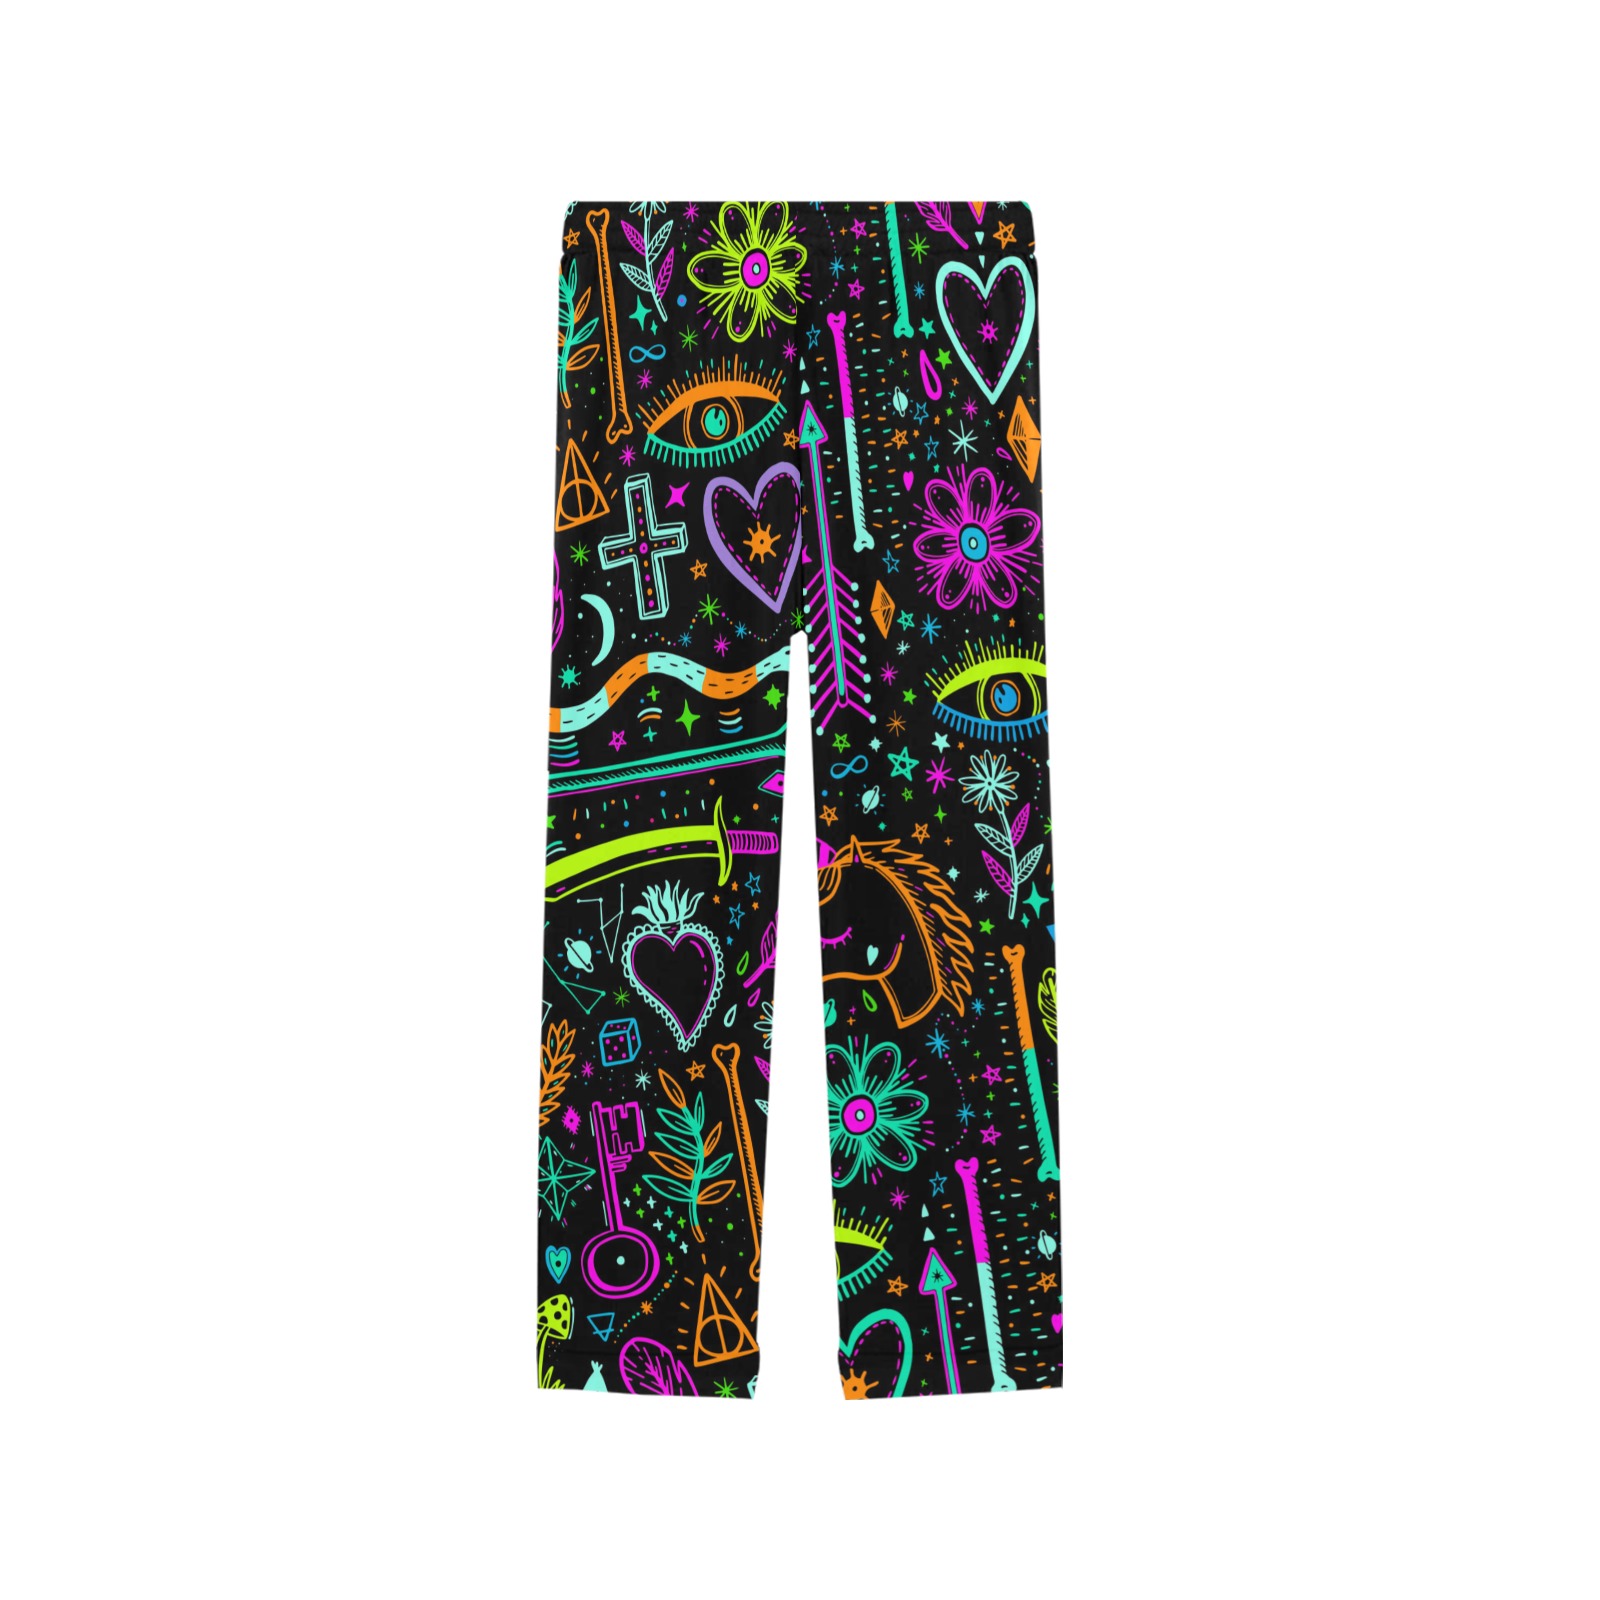 Funny Nature Of Life Sketchnotes Pattern 3 Women's Pajama Trousers